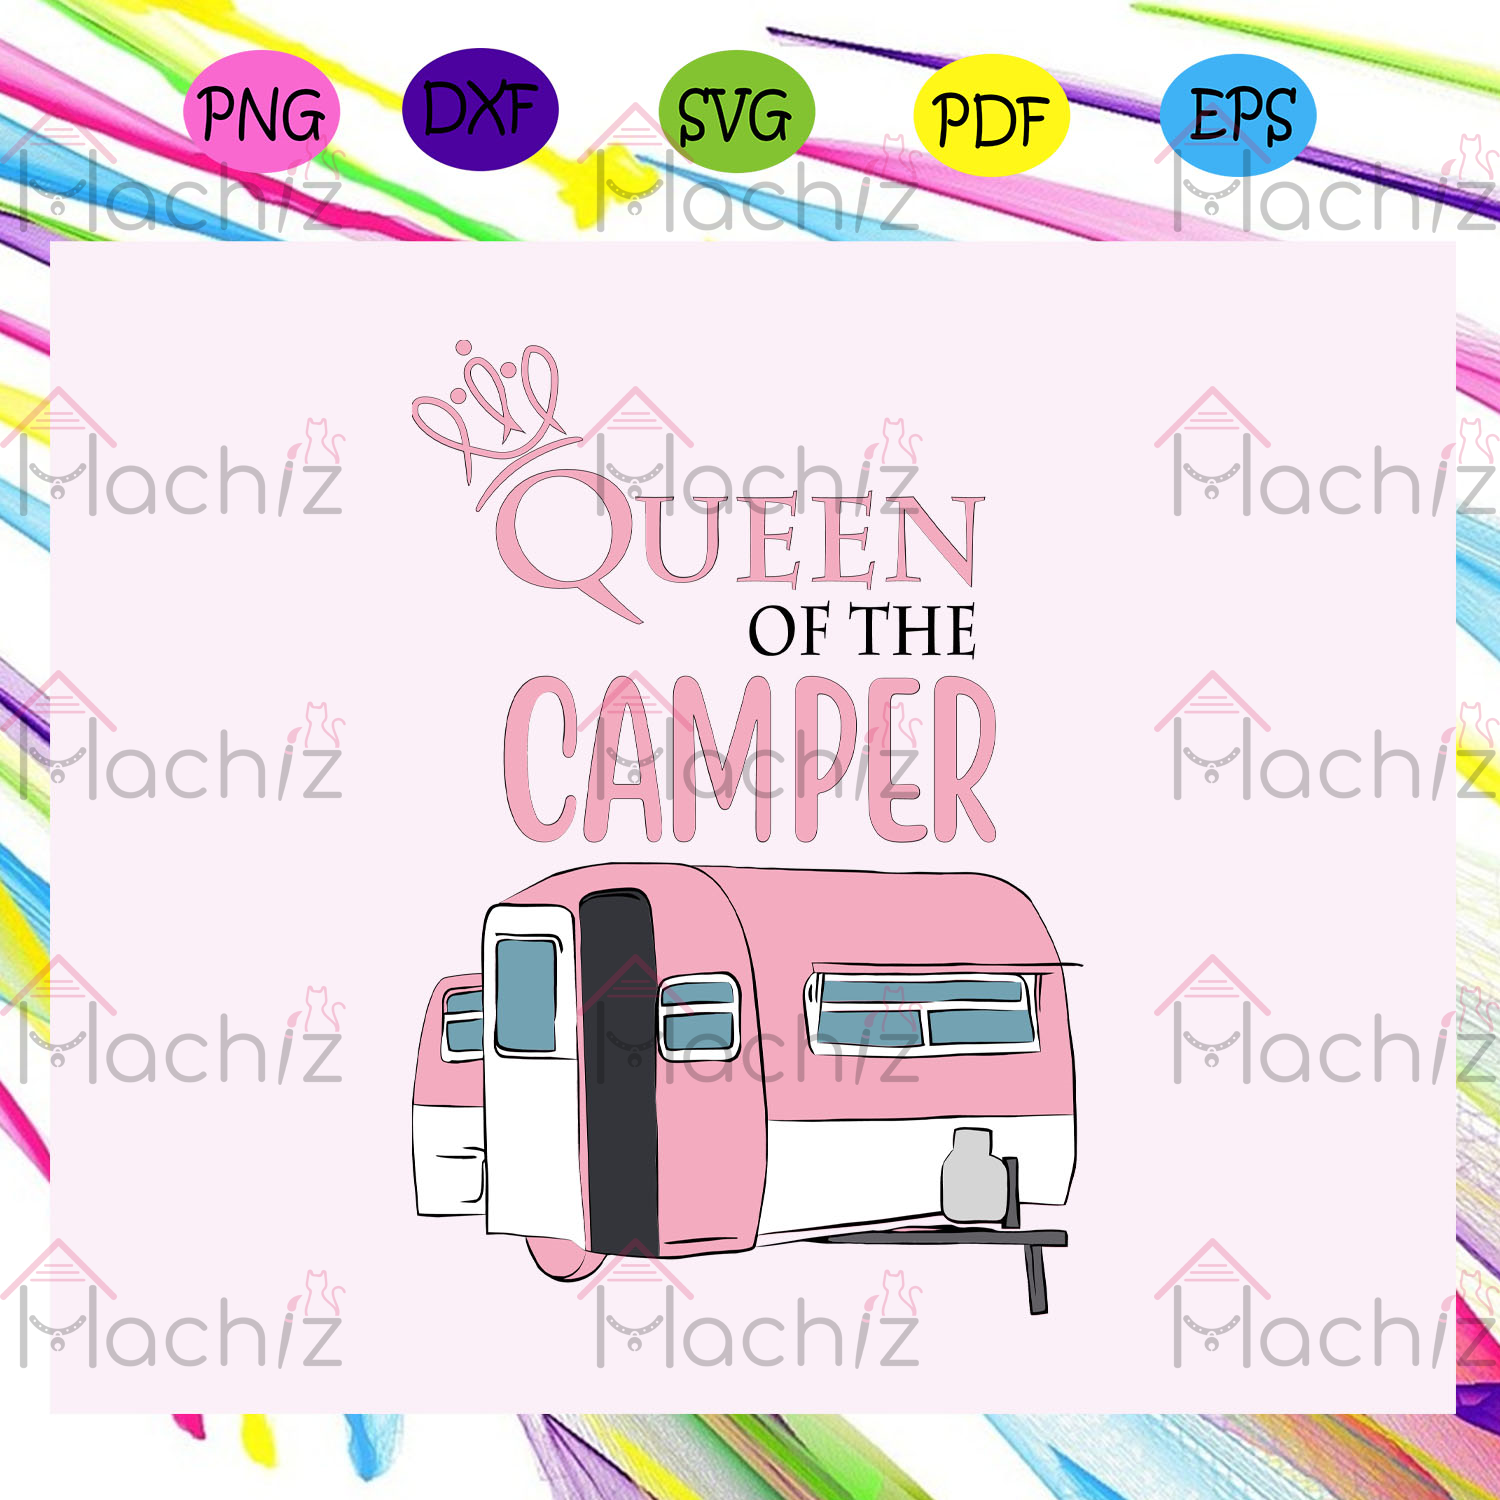 Download Queen Of The Camper Campfire Svg Camping Svg Files For Silhouette Cherishsvgstudio